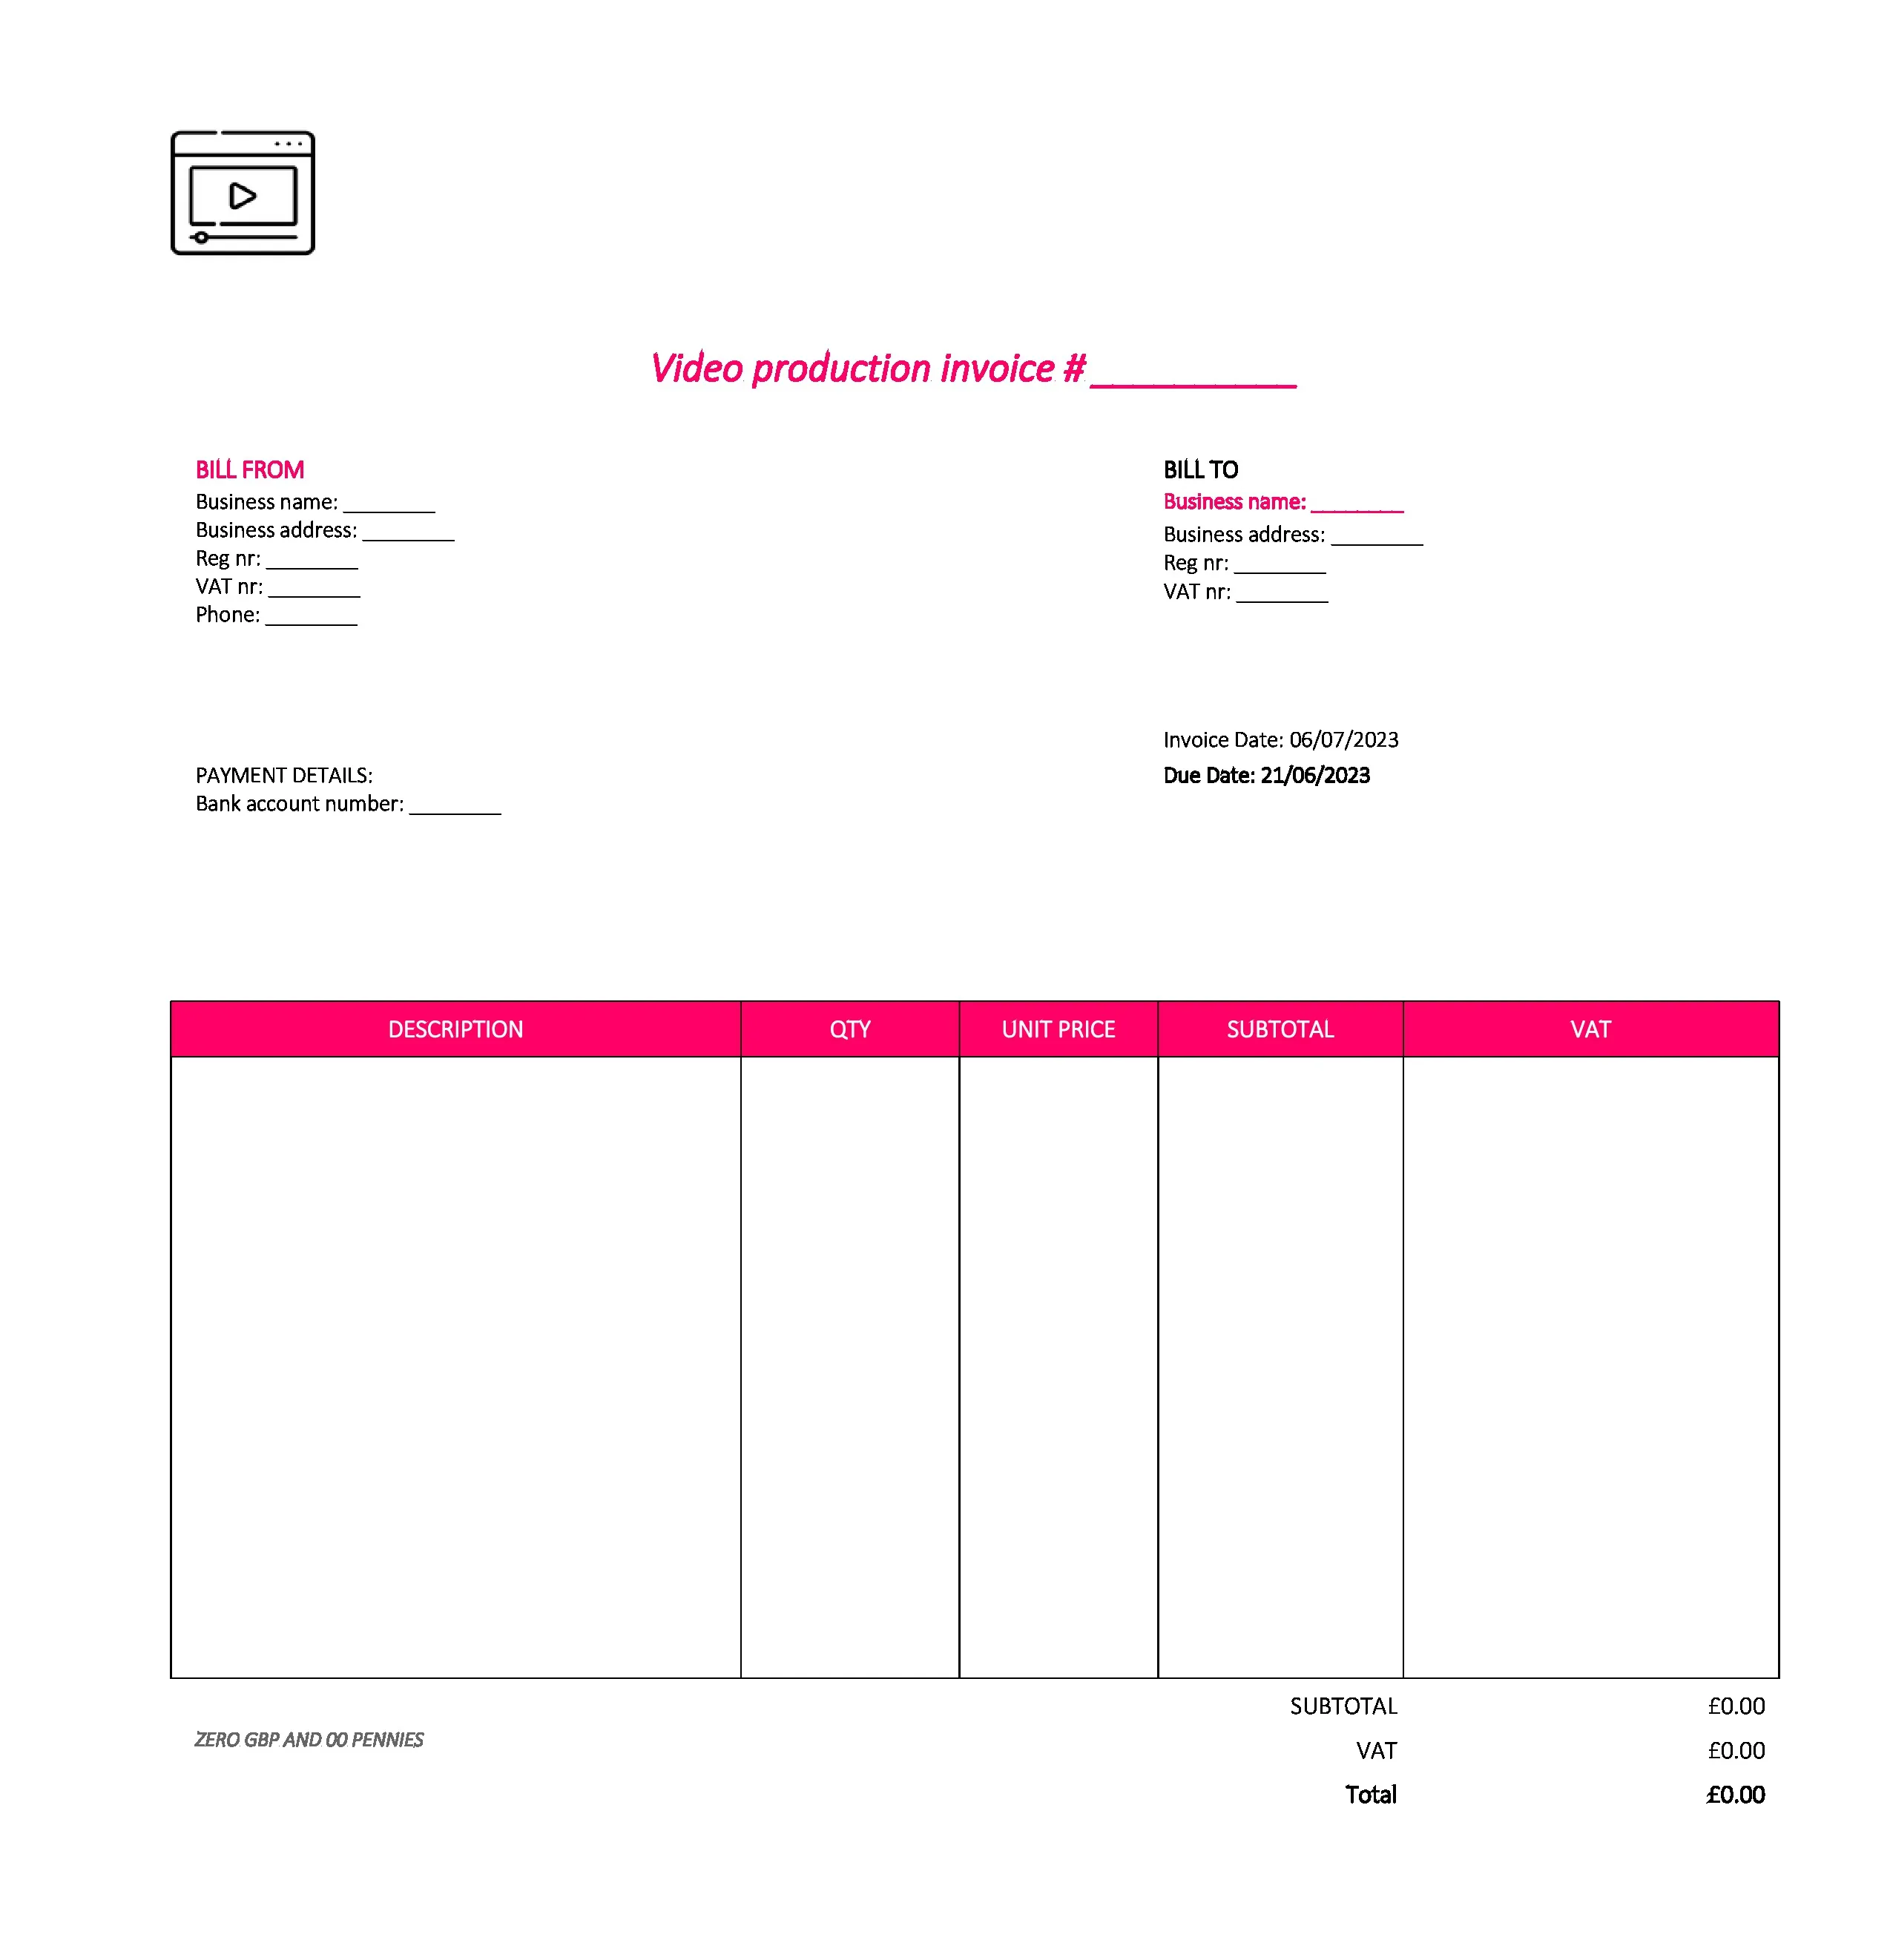 nice video production invoice template UK Excel / Google sheets